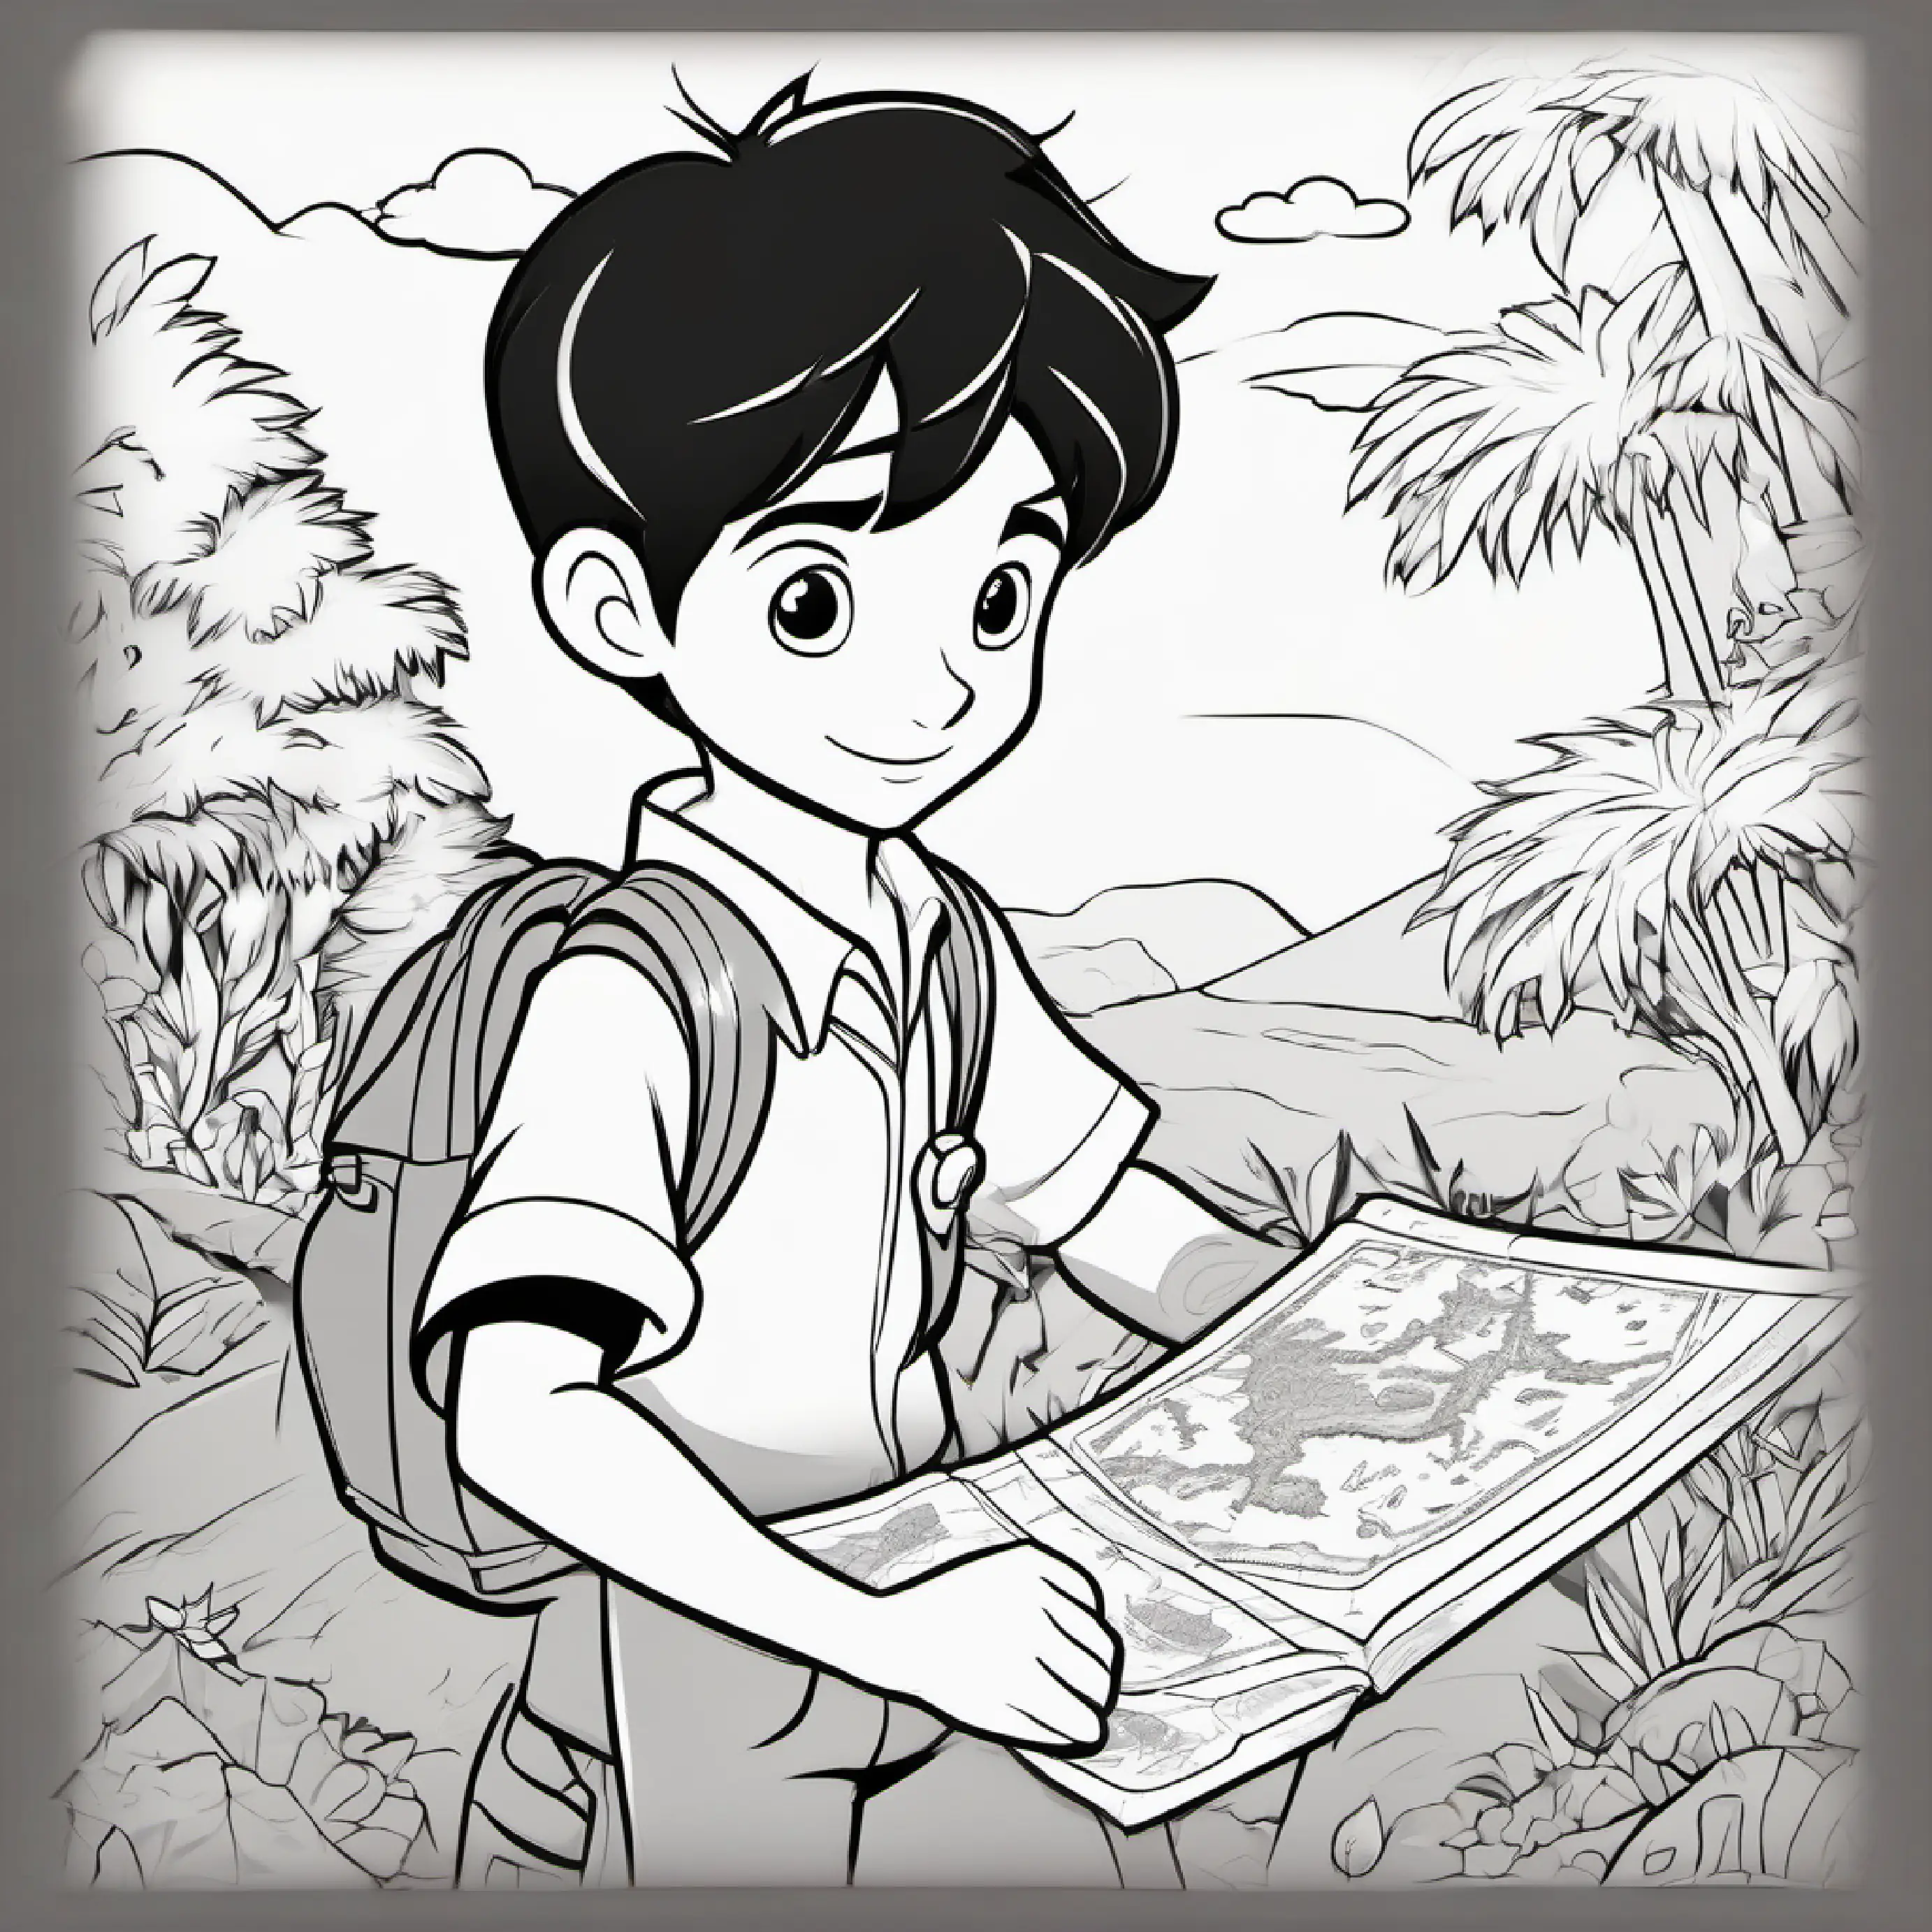 New boy with short black hair and thoughtful brown eyes leads a treasure map game, sandbox becomes a pretend treasure hunt.